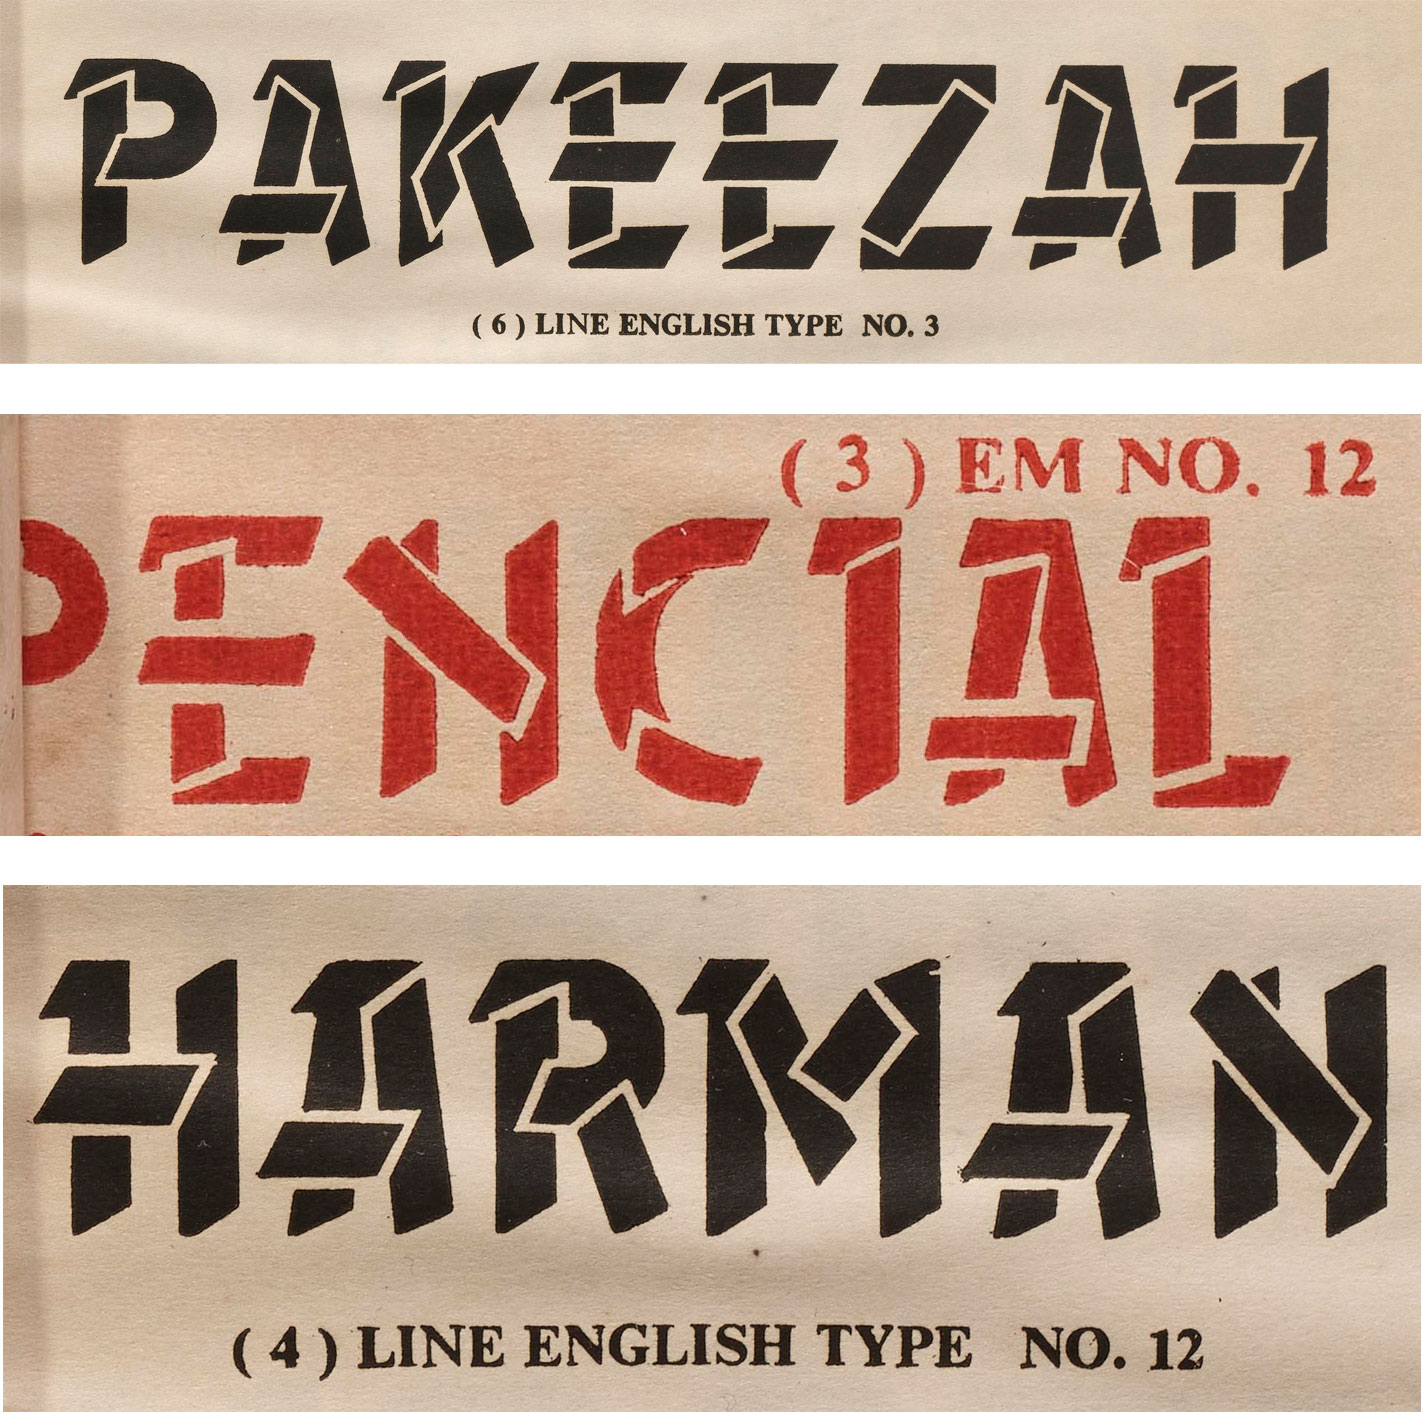 Pakeezah one-line samples from various pages across the catalog.